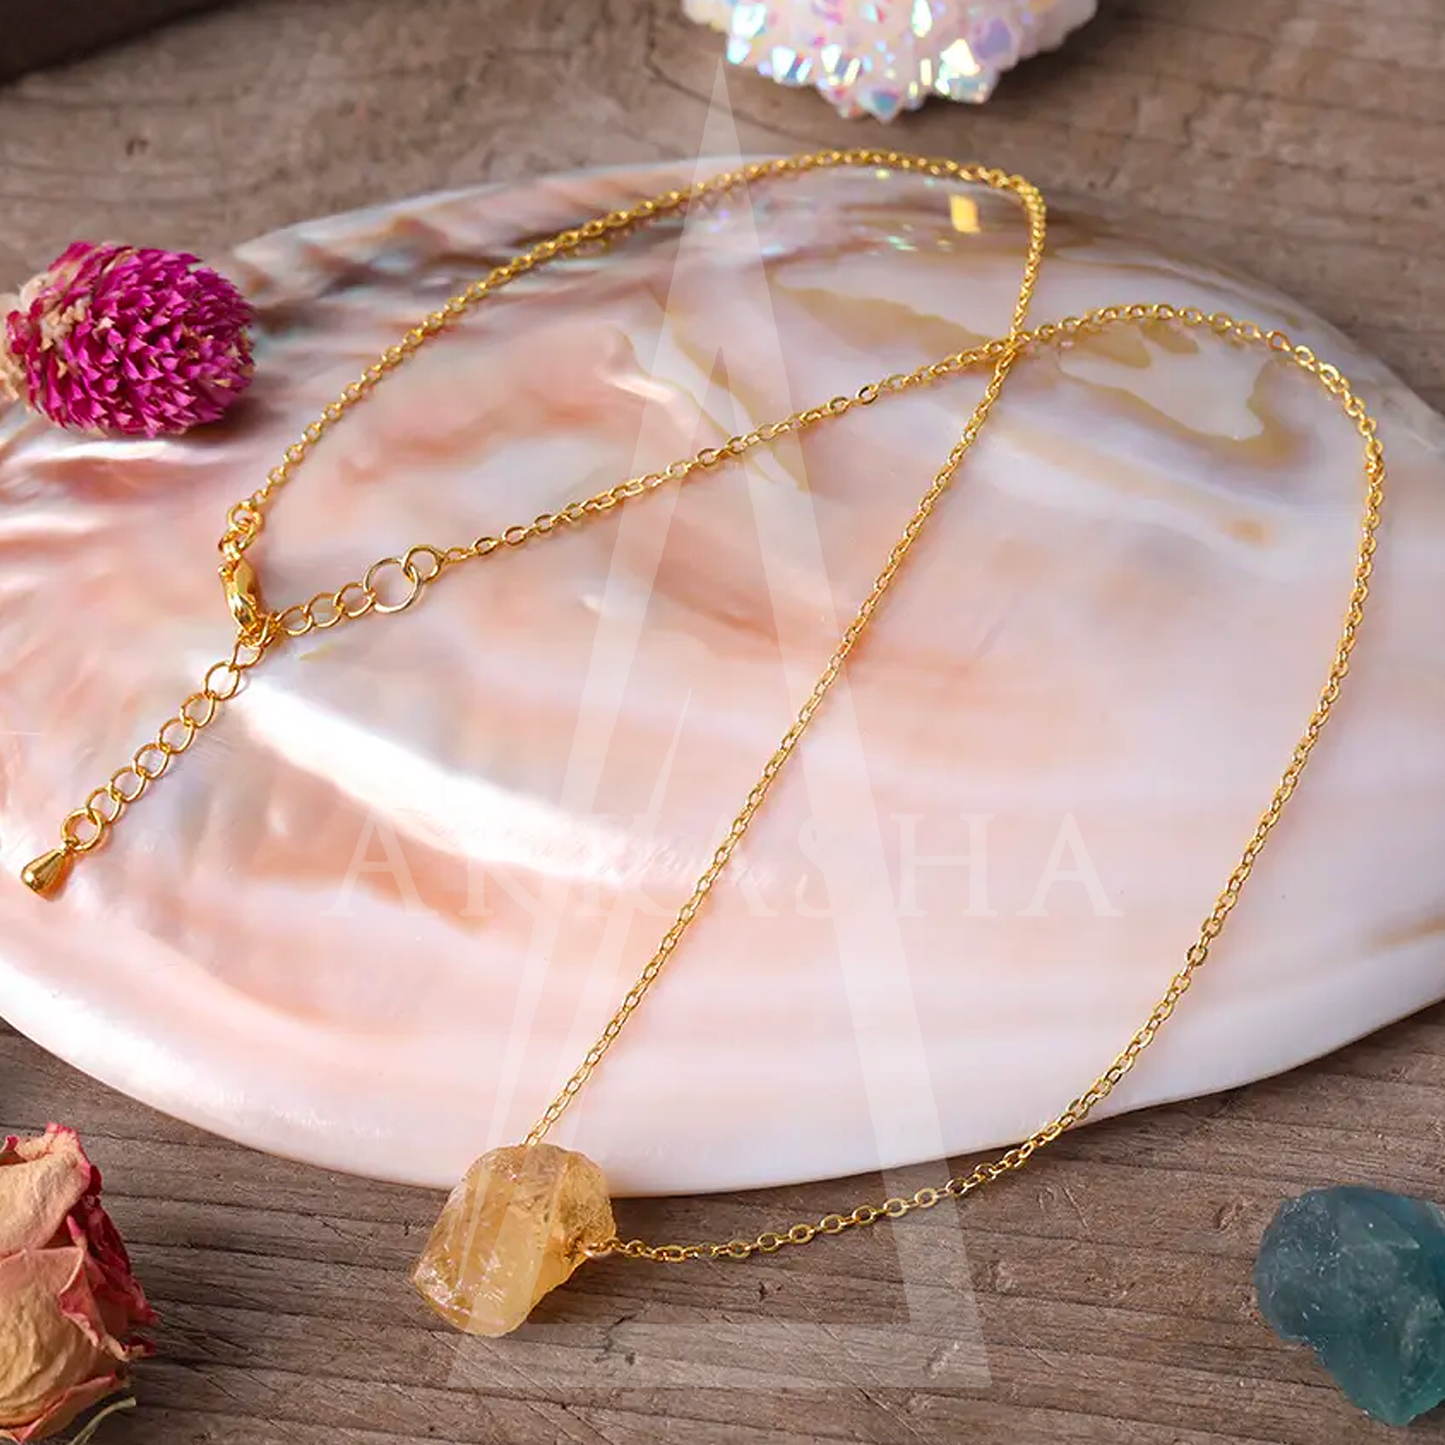 RAW CRYSTAL NECKLACE